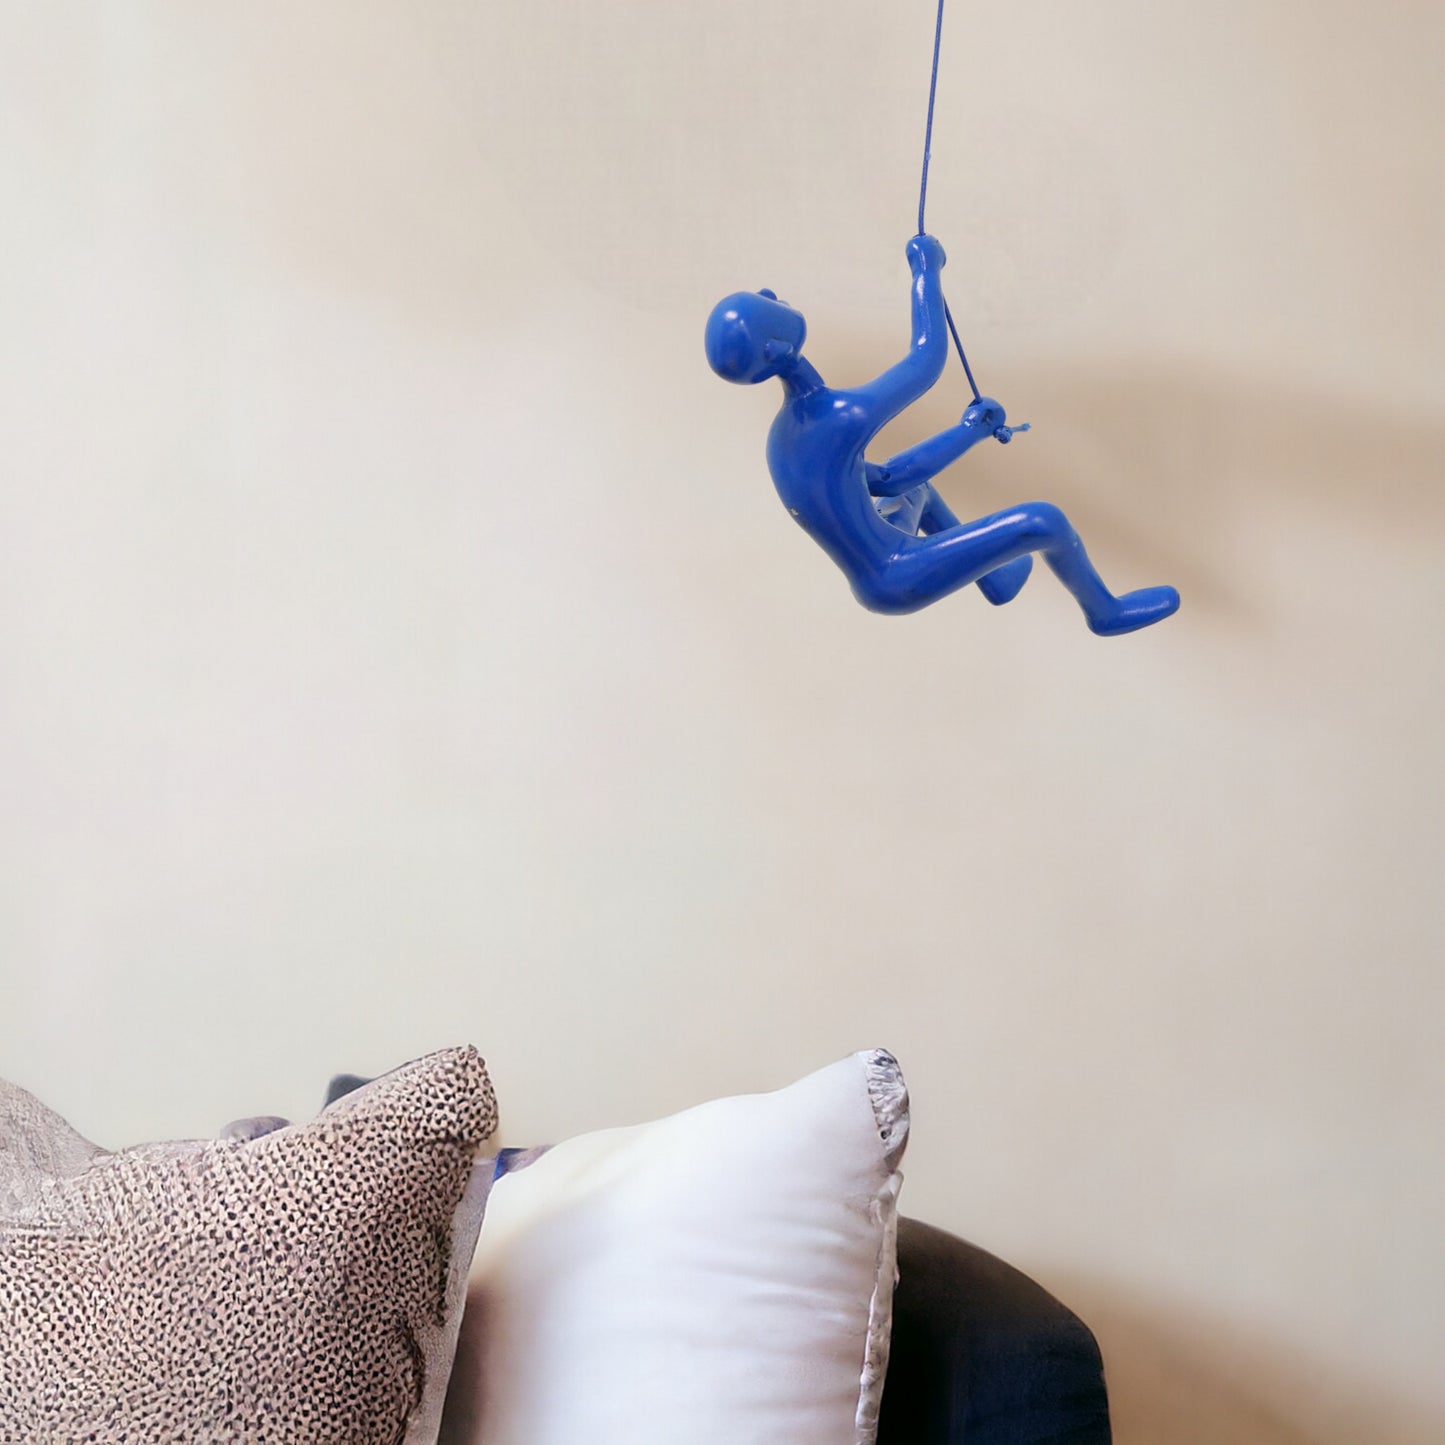 6" Blue Unique Climbing Man With Rope Wall Art